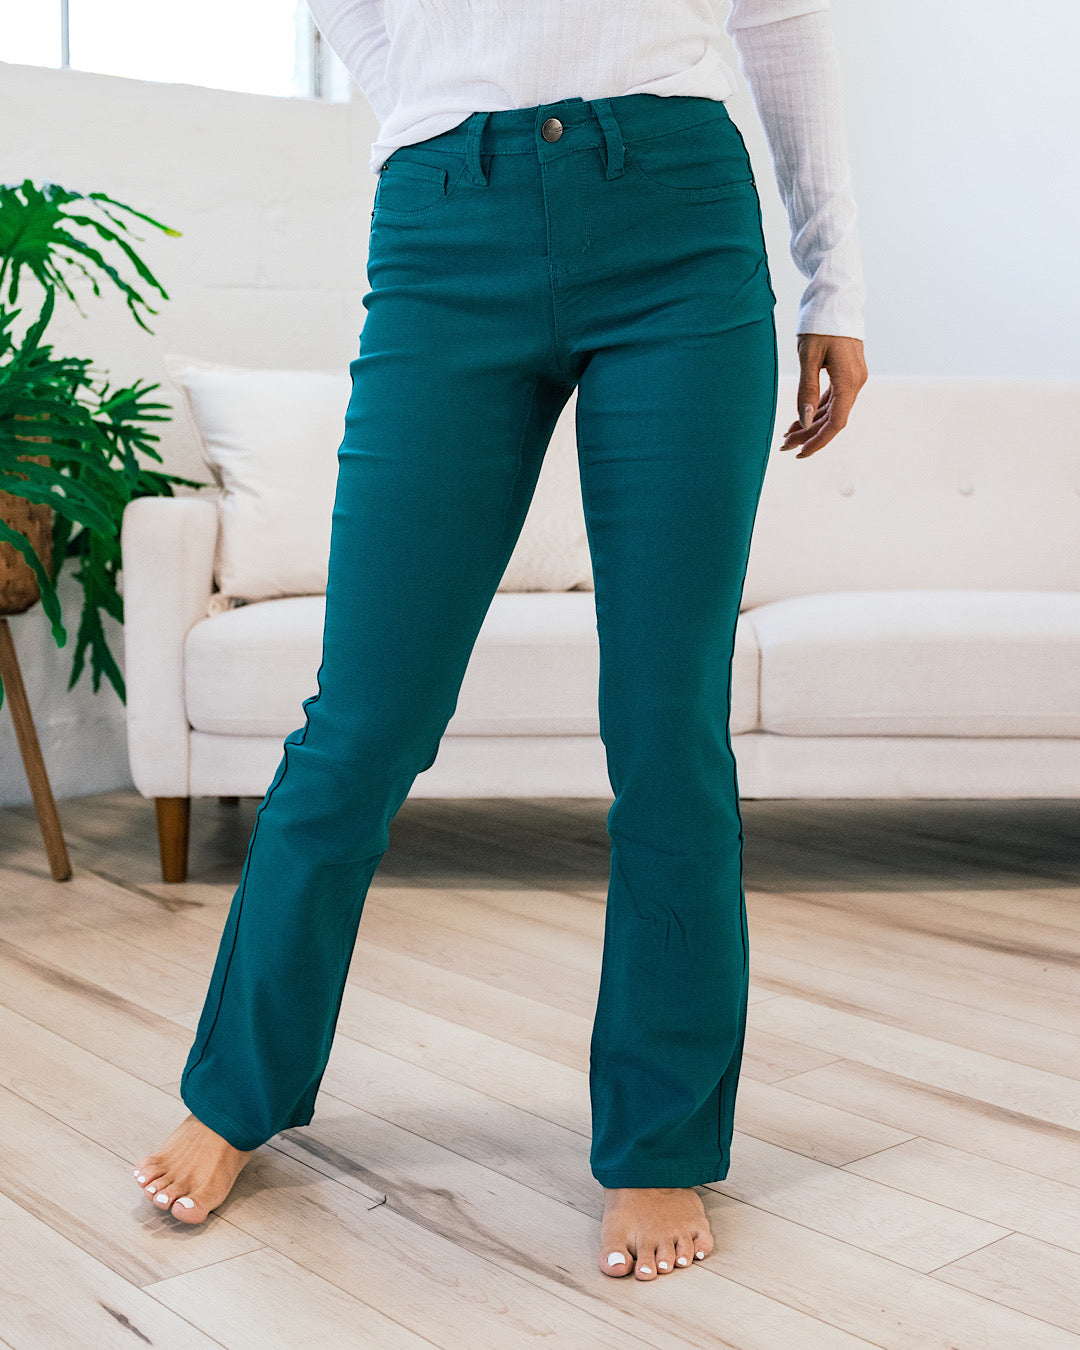 Hyperstretch Bootcut Jeans - Emerald  YMI   